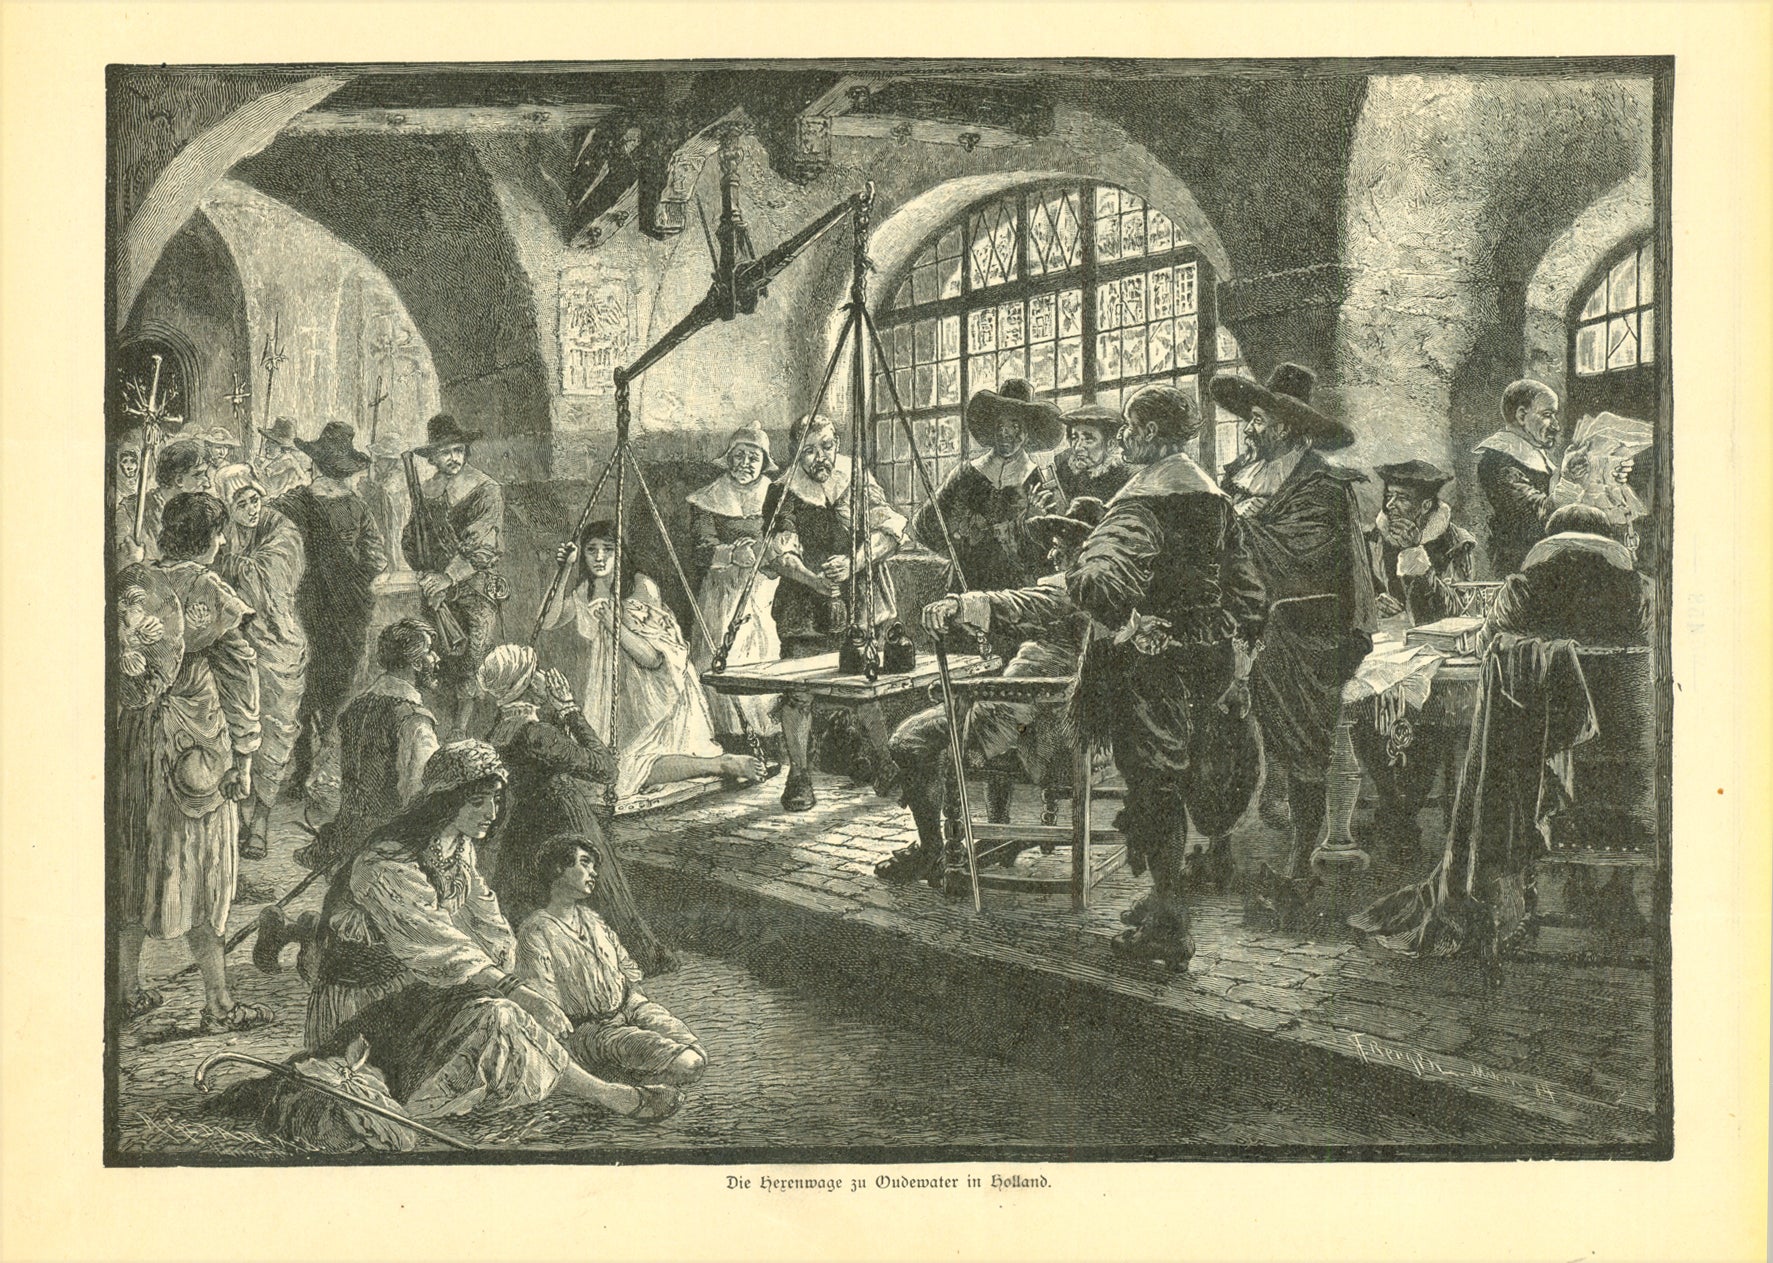 "Die Hexenwage in Oudewater in Holland"  Wood engraving by F. Bergen  With an article in the German language.  Published in a German periodical. 1891